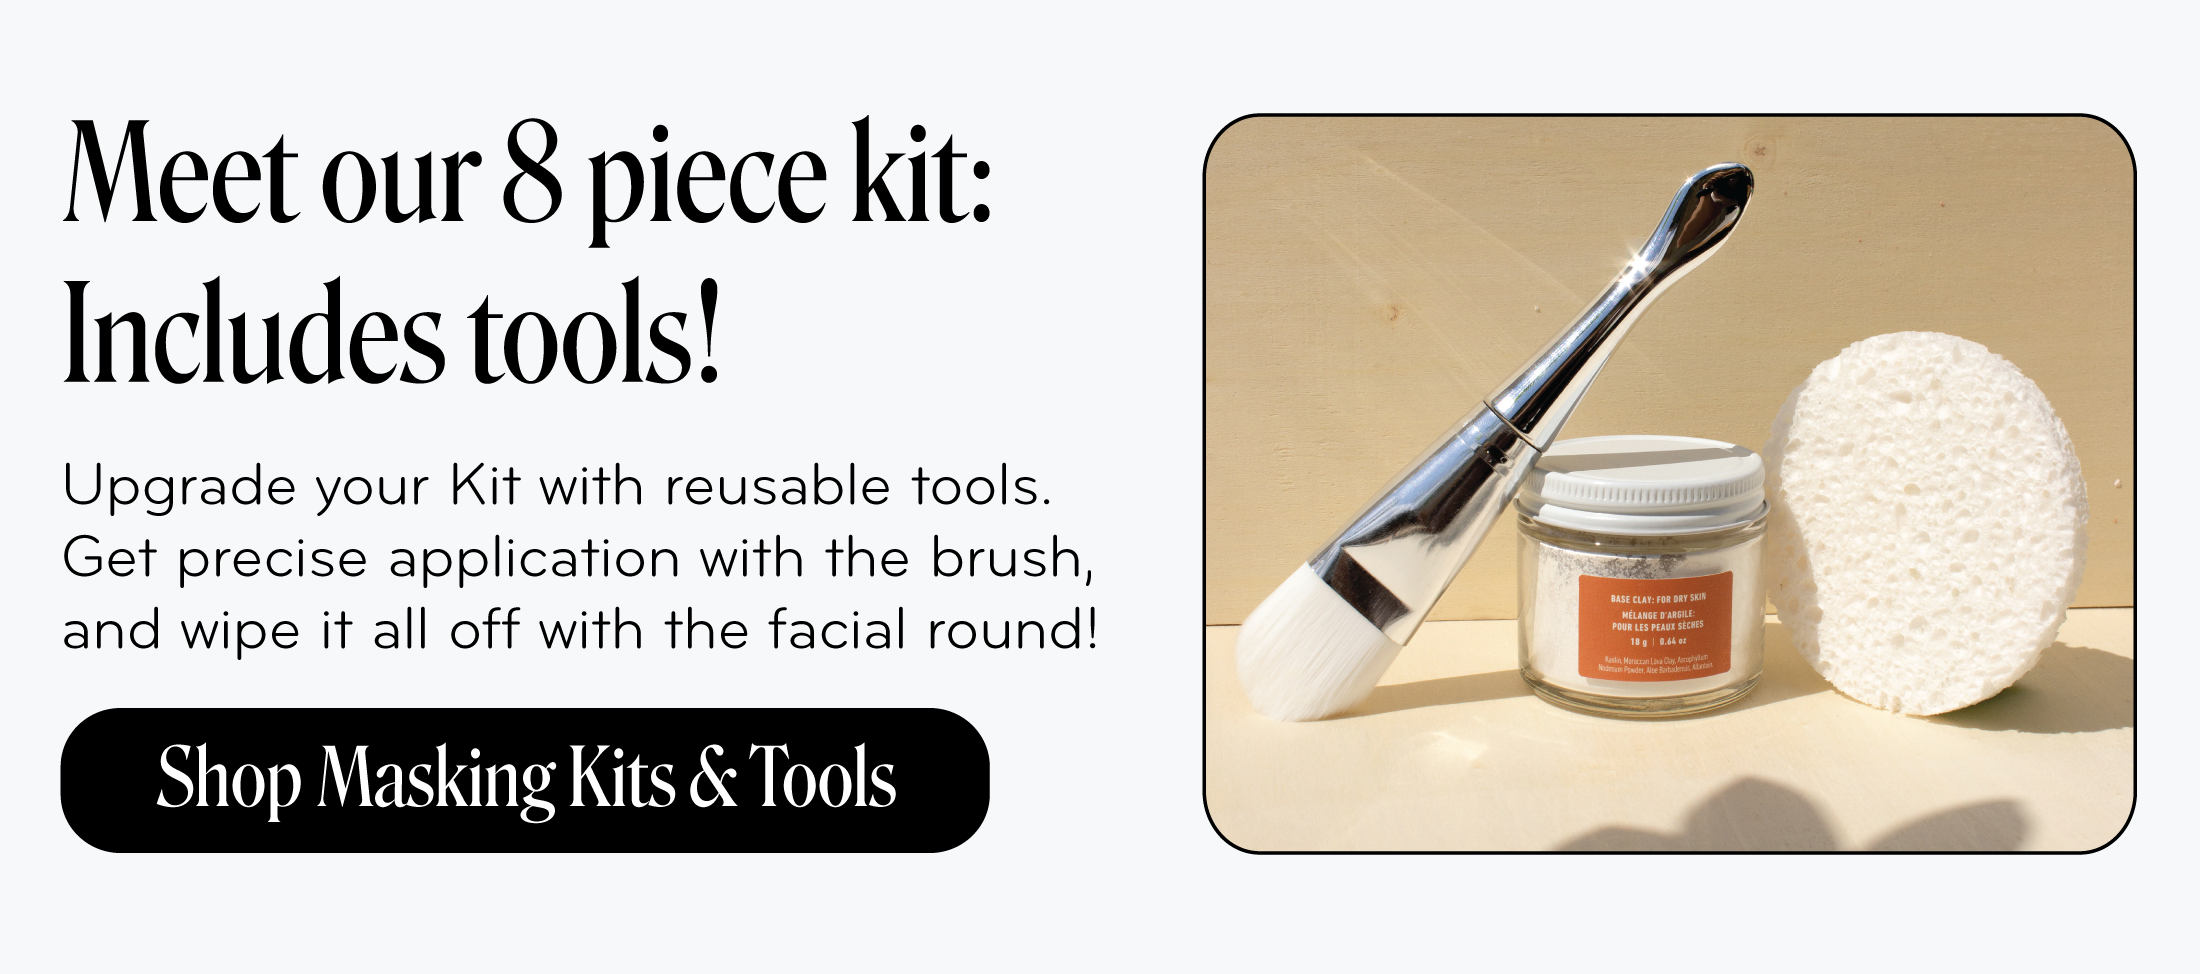 Meet our 8 piece kit: Includes tools!   Upgrade your Kit with reusable tools. Get precise application with the brush, and wipe it all off with the facial round!